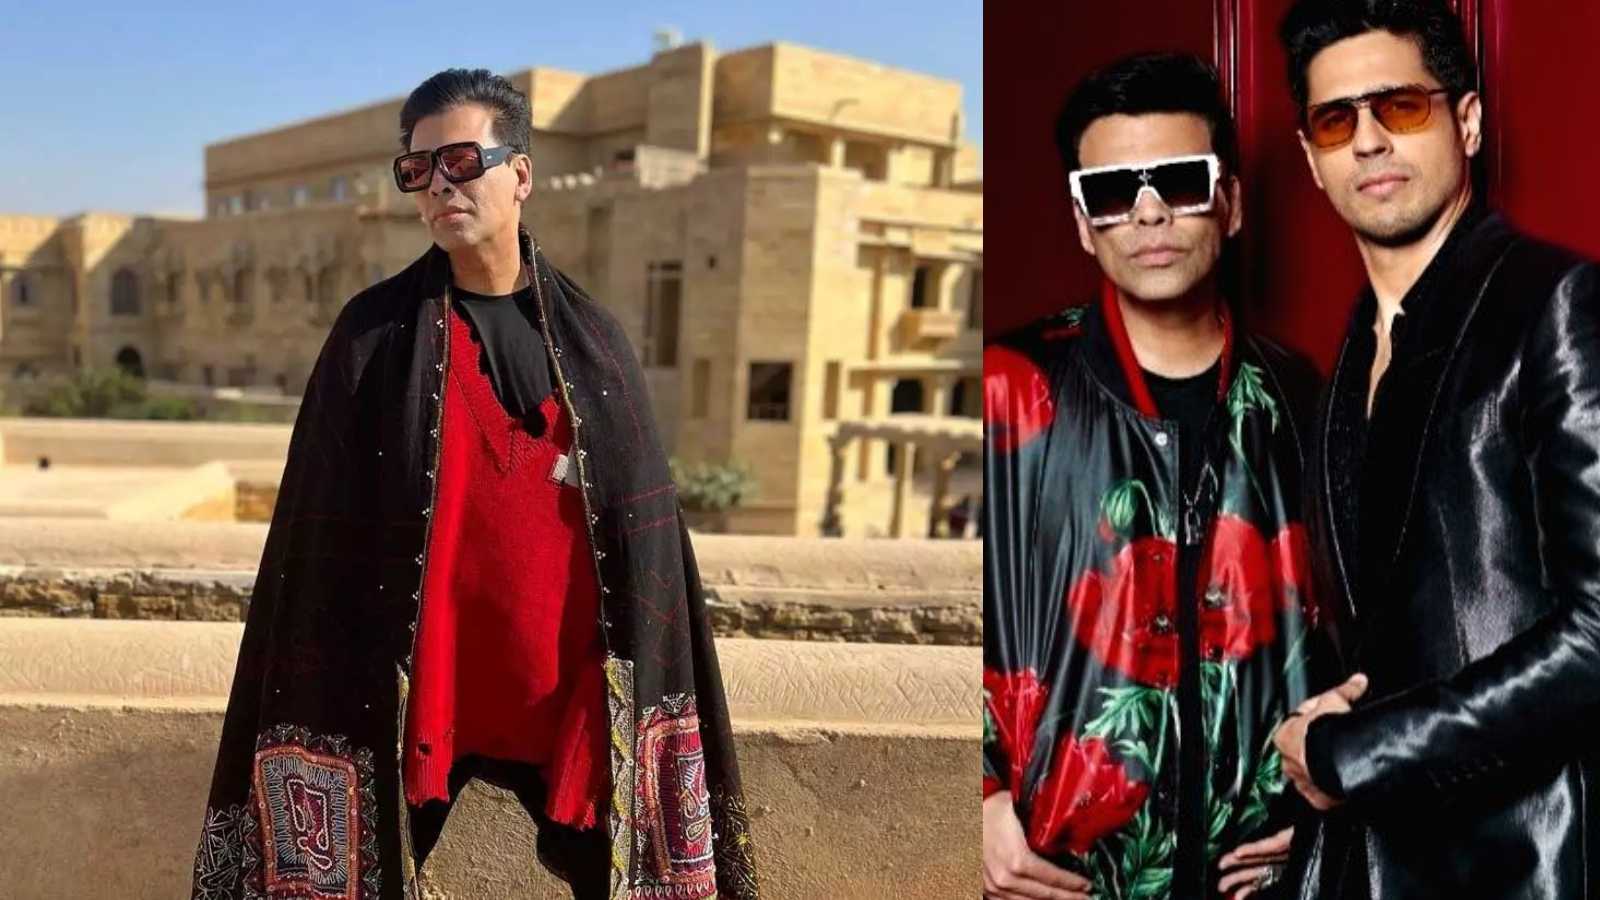 Sidharth Malhotra reimagines Gangs of Wasseypur starring Karan Johar in a 'Gucci shawl' and it's our favourite Koffee With Karan moment